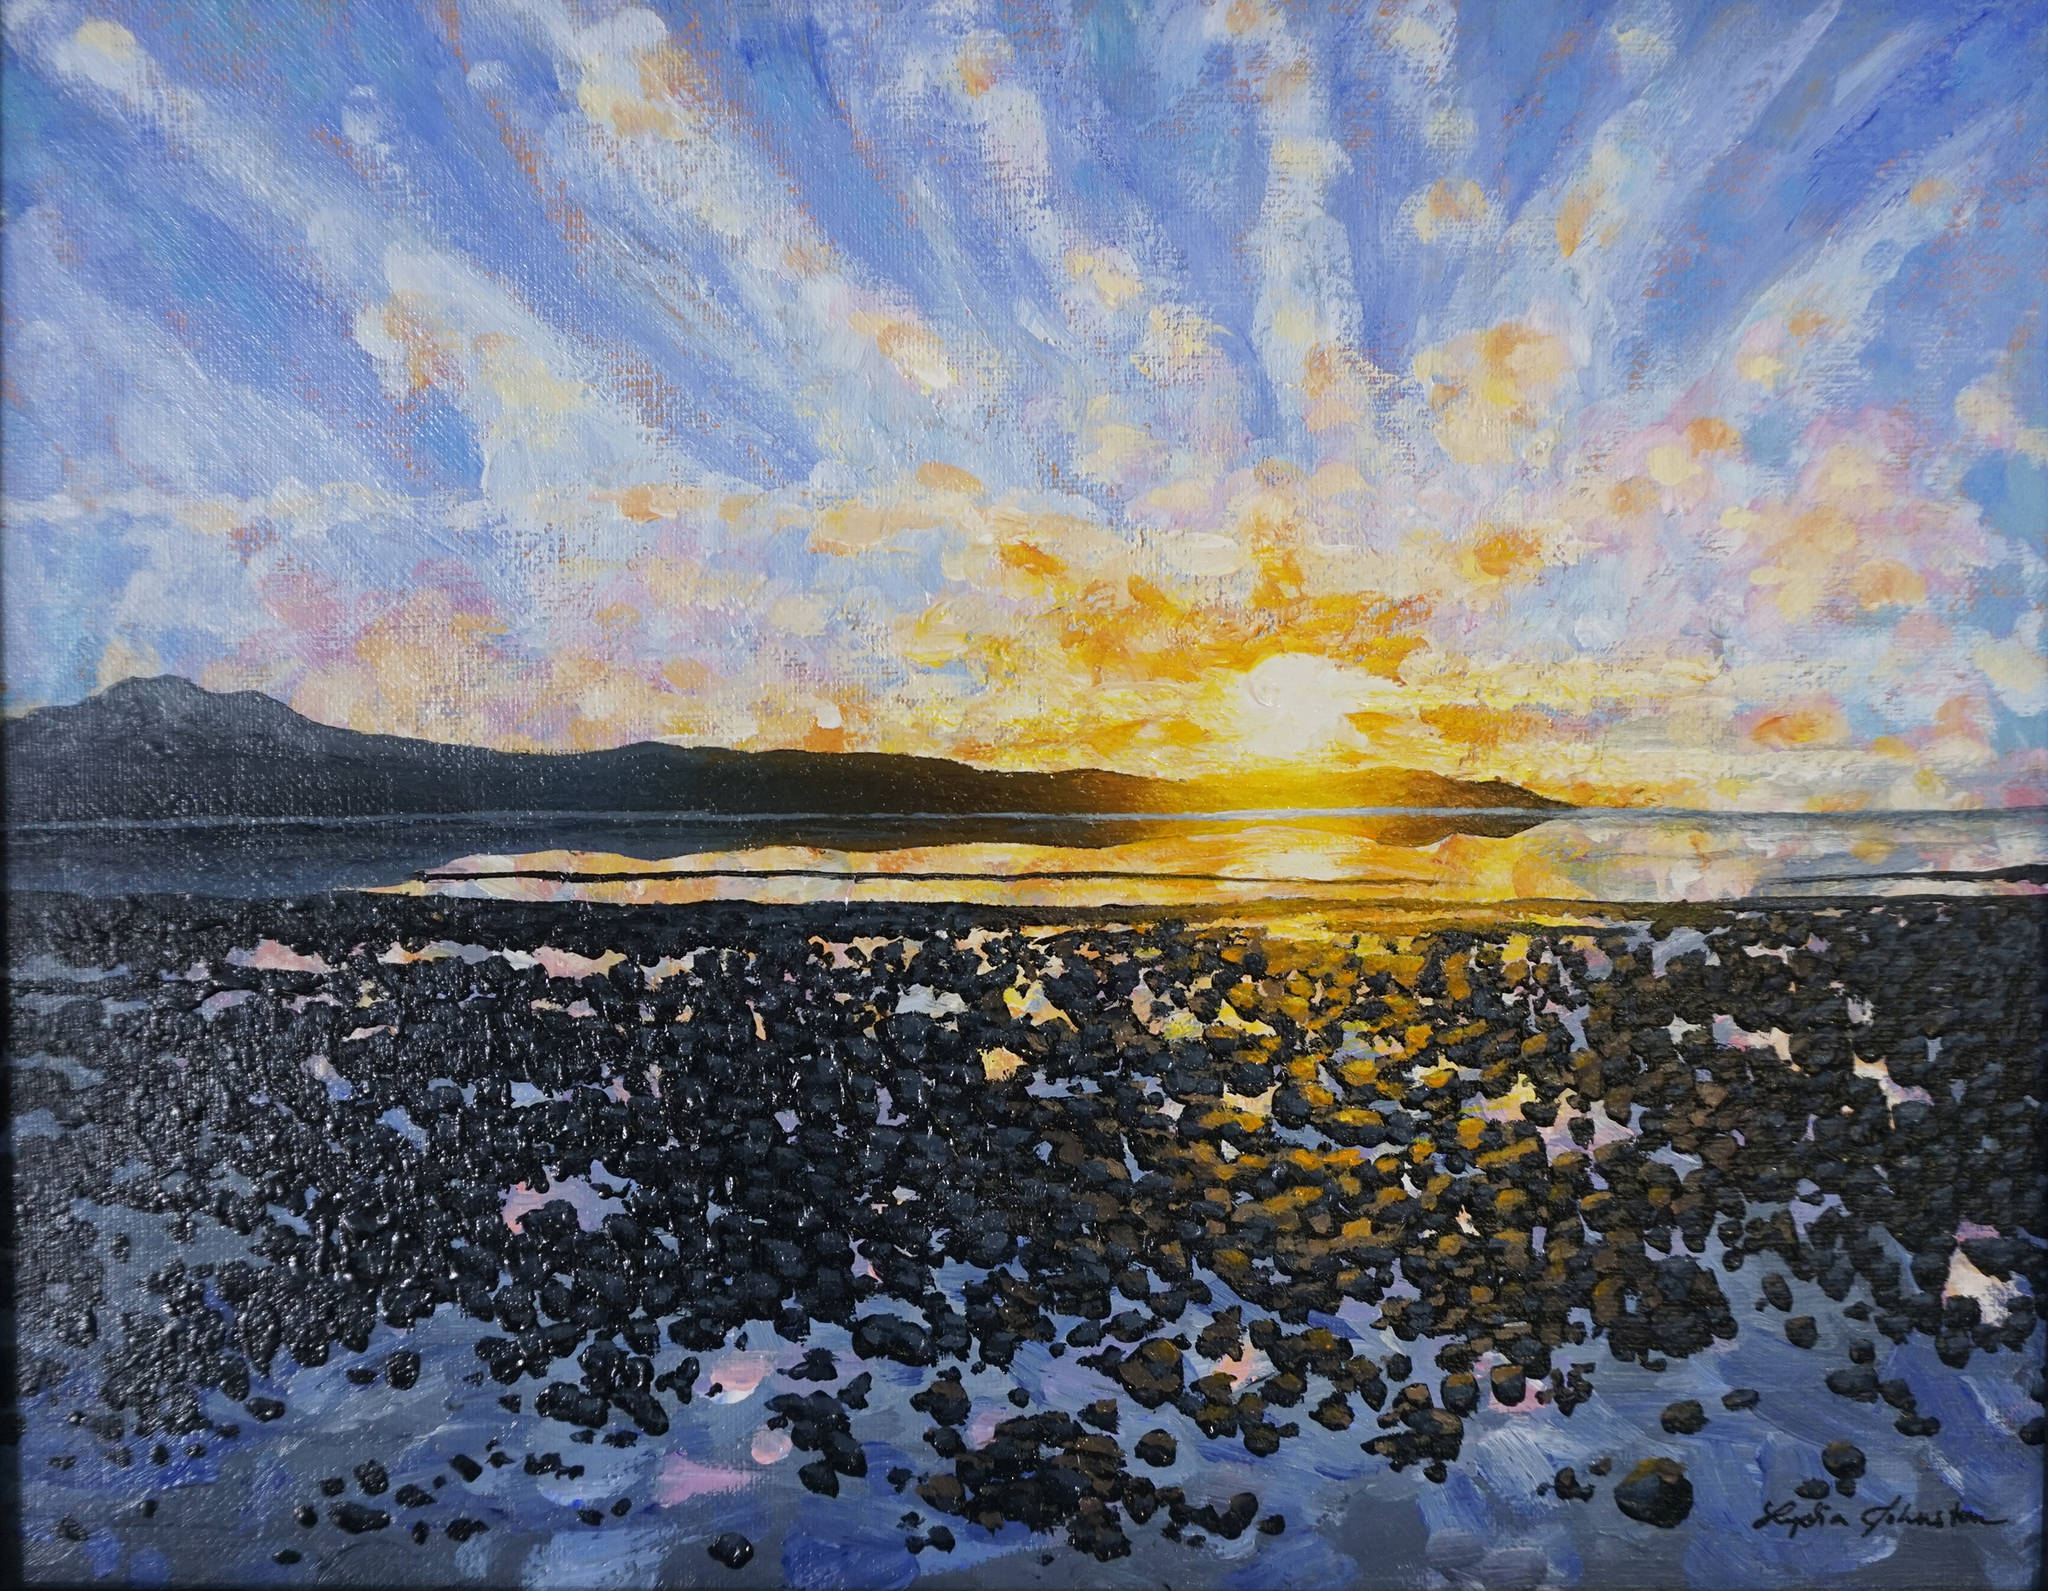 Lydia Johnston’s “December,” one of the paintings from her show, “Dynamic Lighting in Alaska,” that opened June 5, 2020, at Grace Ridge Brewery in Homer, Alaska. (Photo by Michael Armstrong/Homer News)